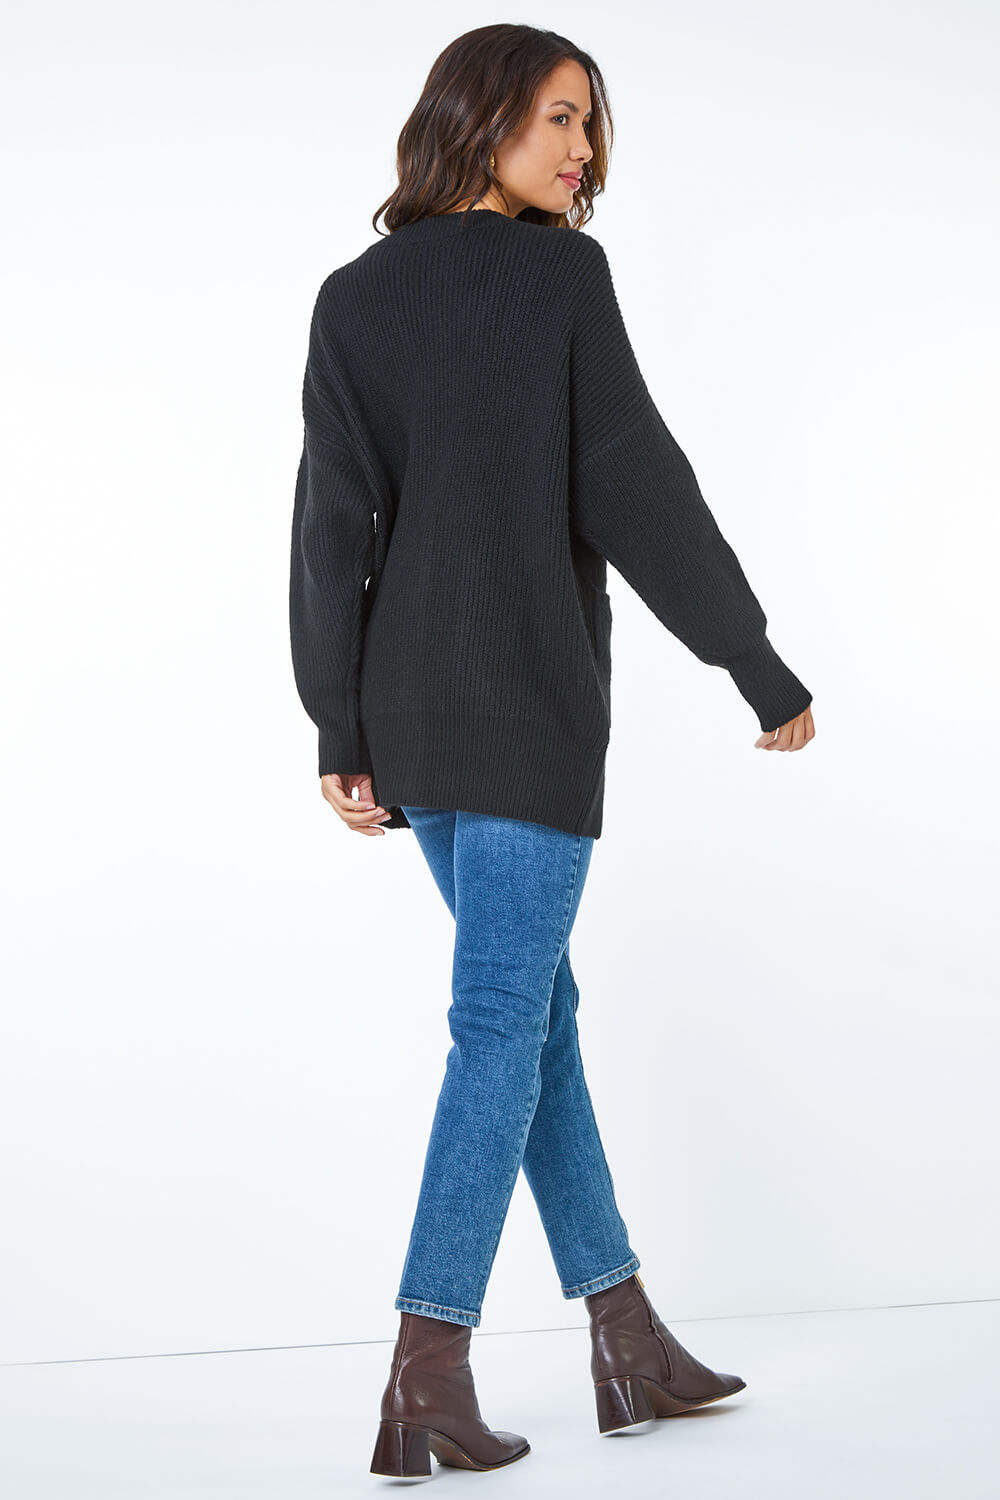 Black Relaxed Longline Cardigan , Image 3 of 5